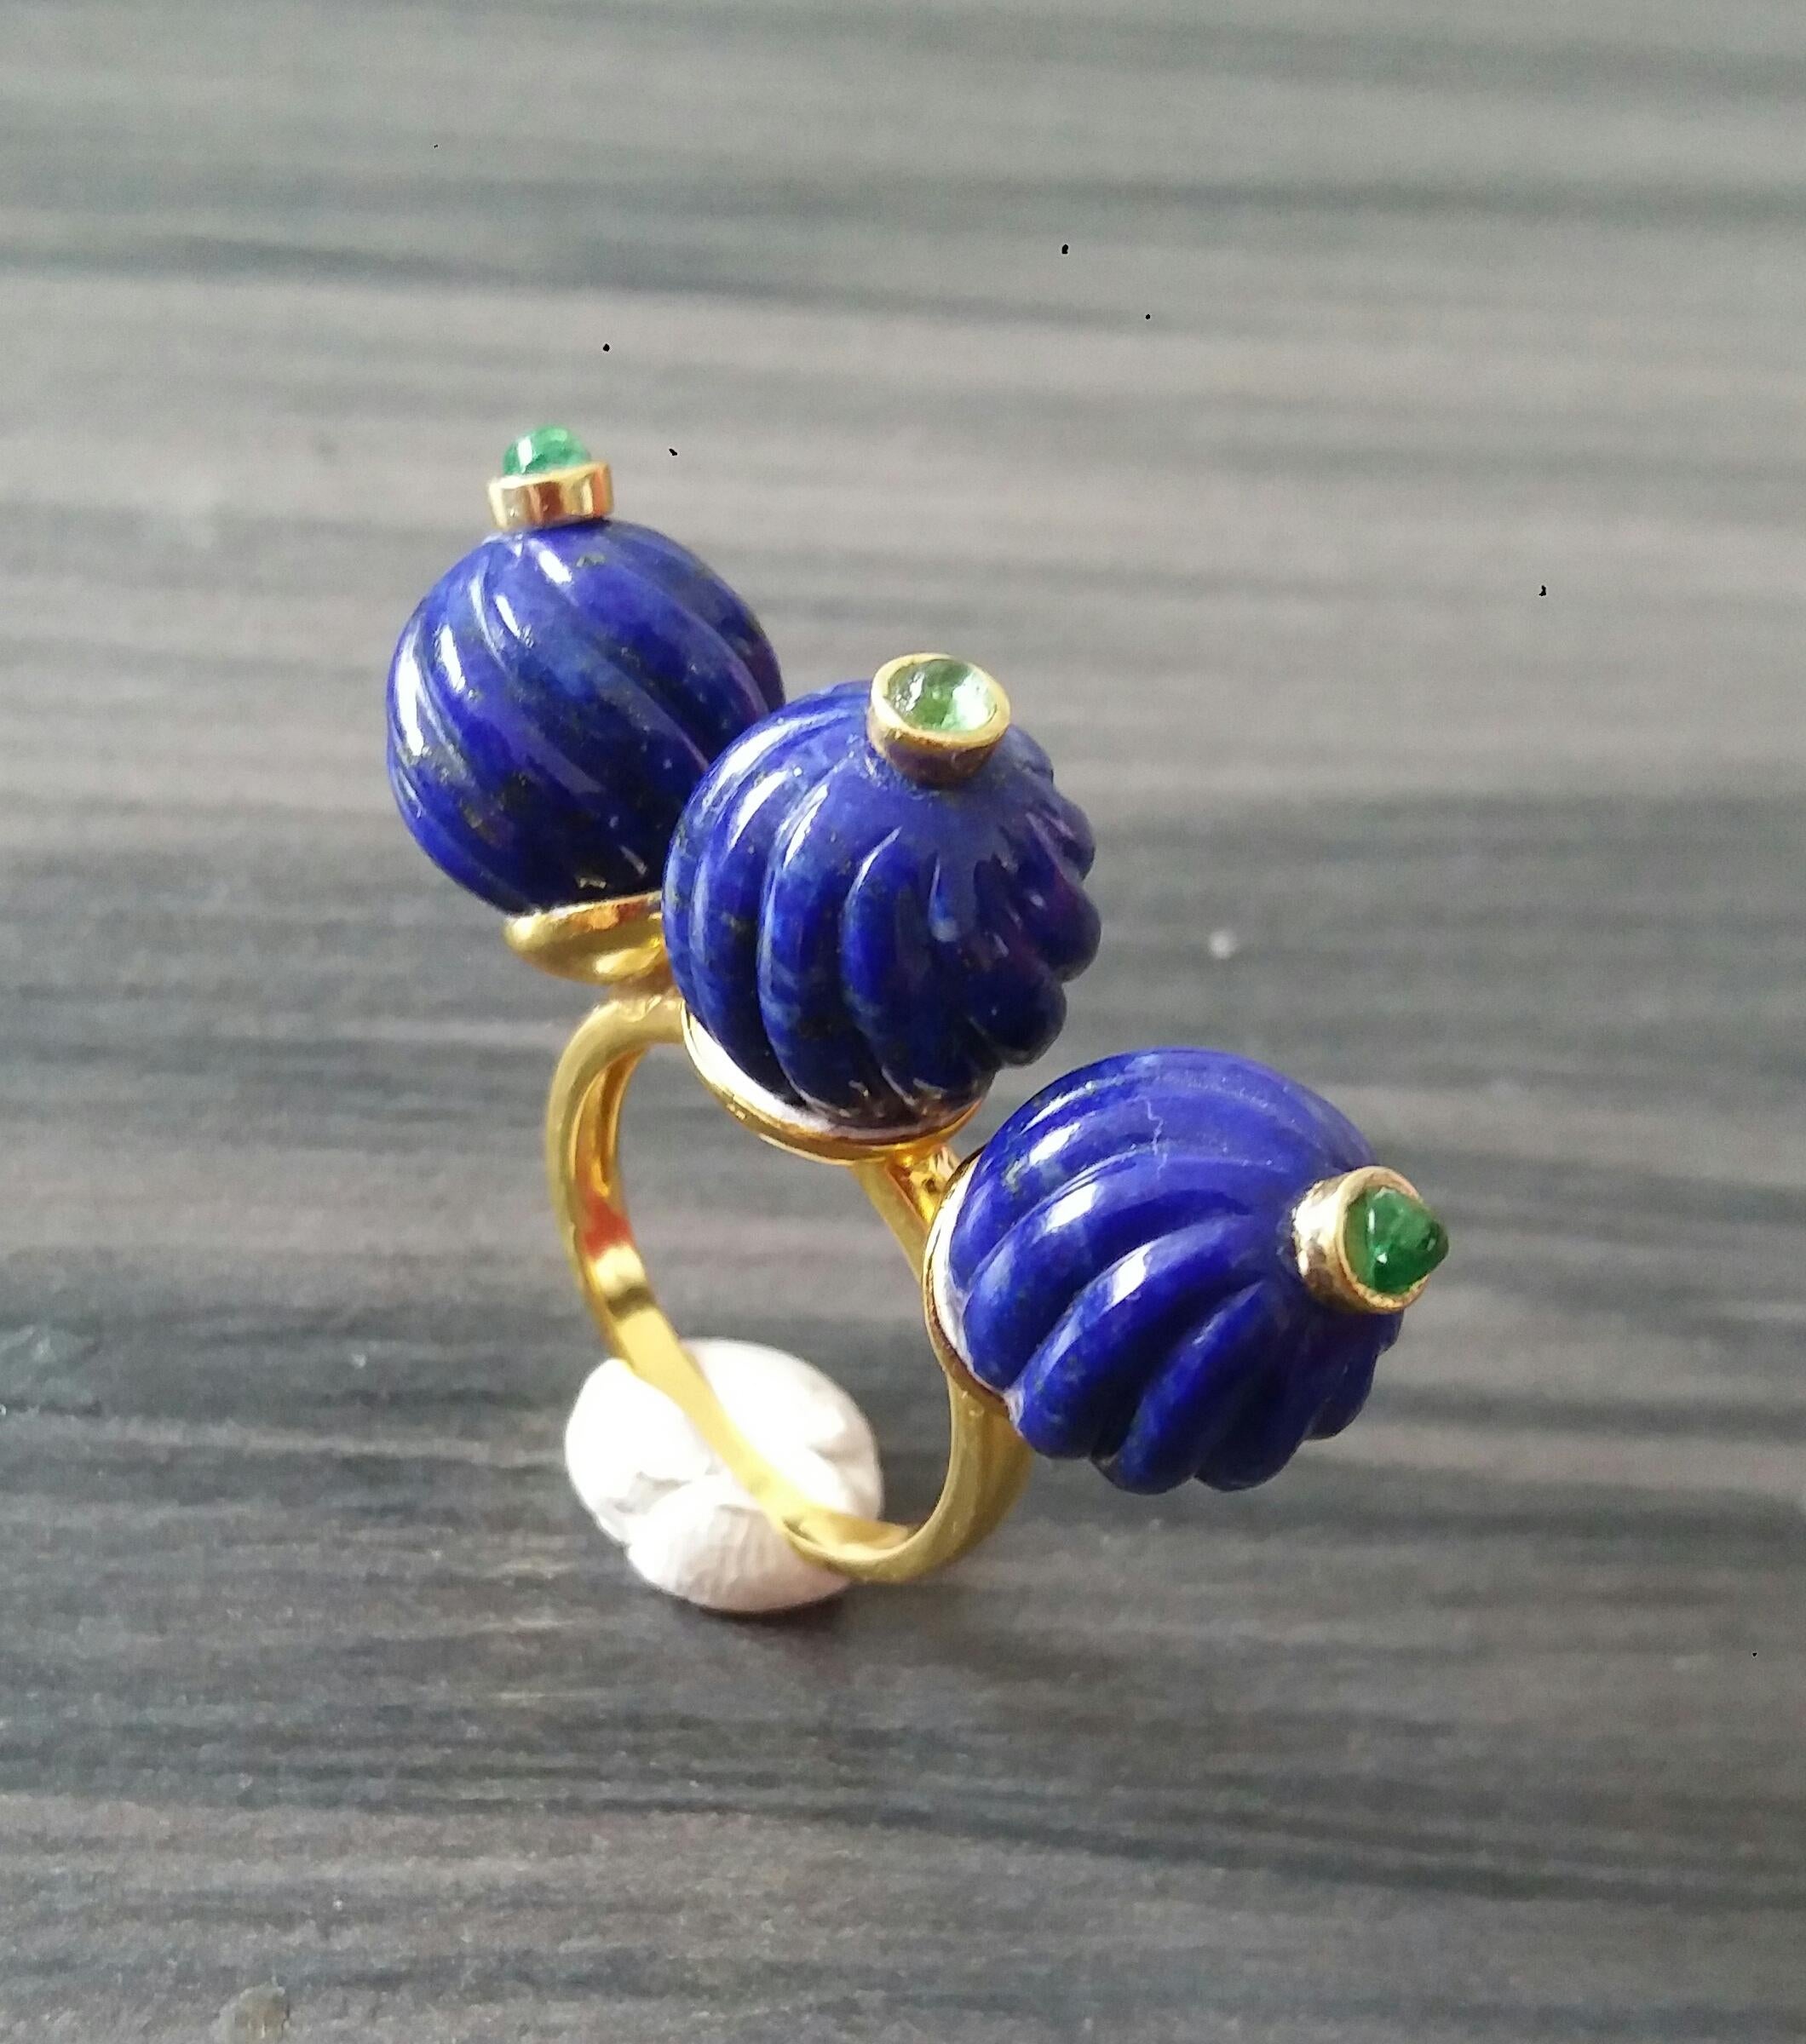 Unique and Classic Cocktail Ring composed of 3 engraved spheres of Lapis Lazuli of 12 mm. in diameter surmounted by 3 small Emerald cabochons set in yellow gold bezels,all set on a 3 cup yellow gold shank.
In 1978 our workshop started in Italy to